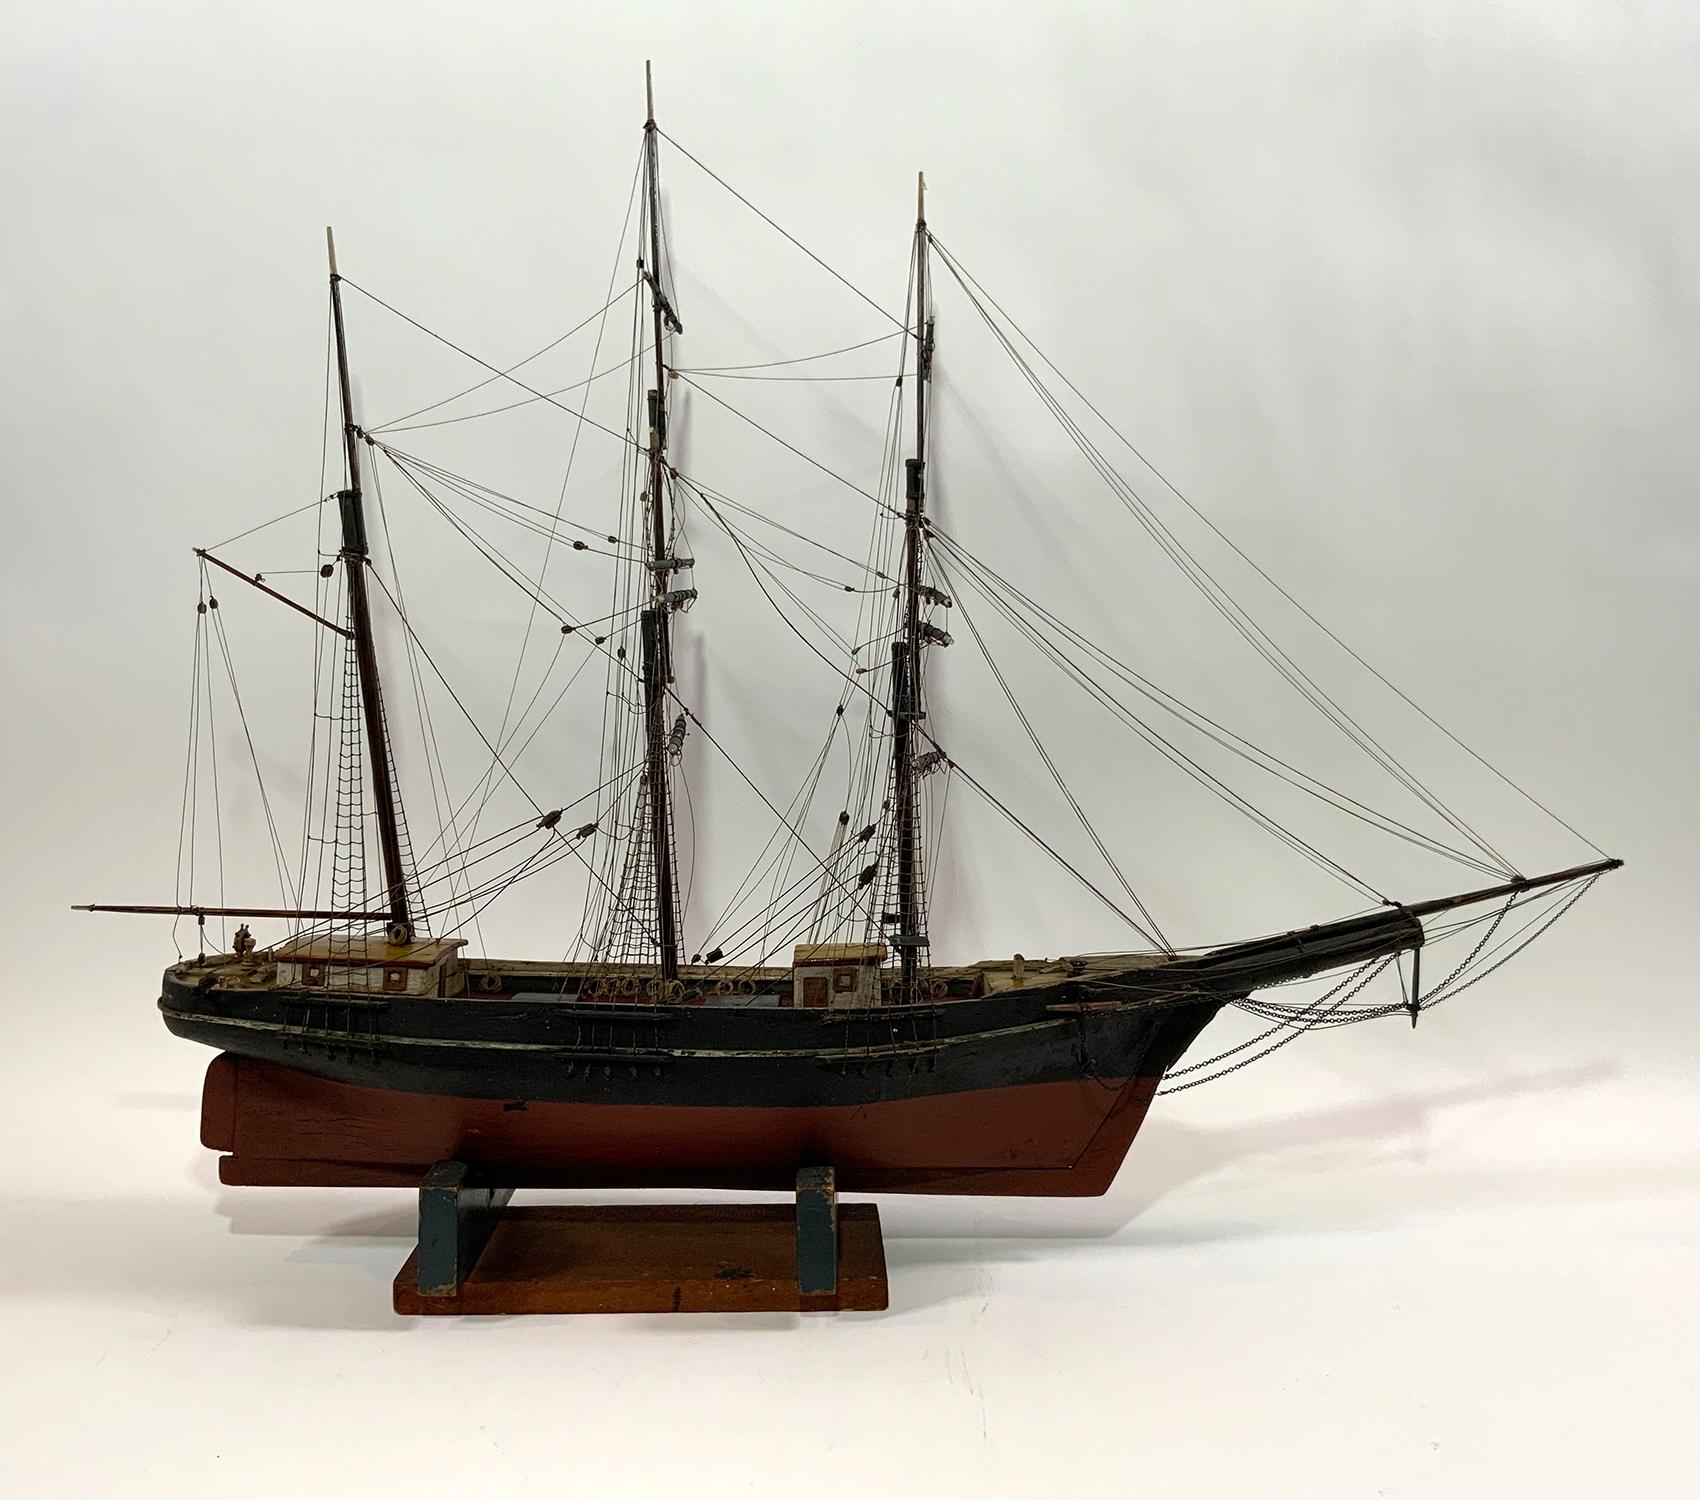 This antique rigged model has standing and running cords, cabins, hatches, etc., colorful paint job. Great old mustard paint. Set onto a simple cradle. Identified on the stern as the T Remmick of Boston. 

Weight: 5 LBS
Overall dimensions: 29” H